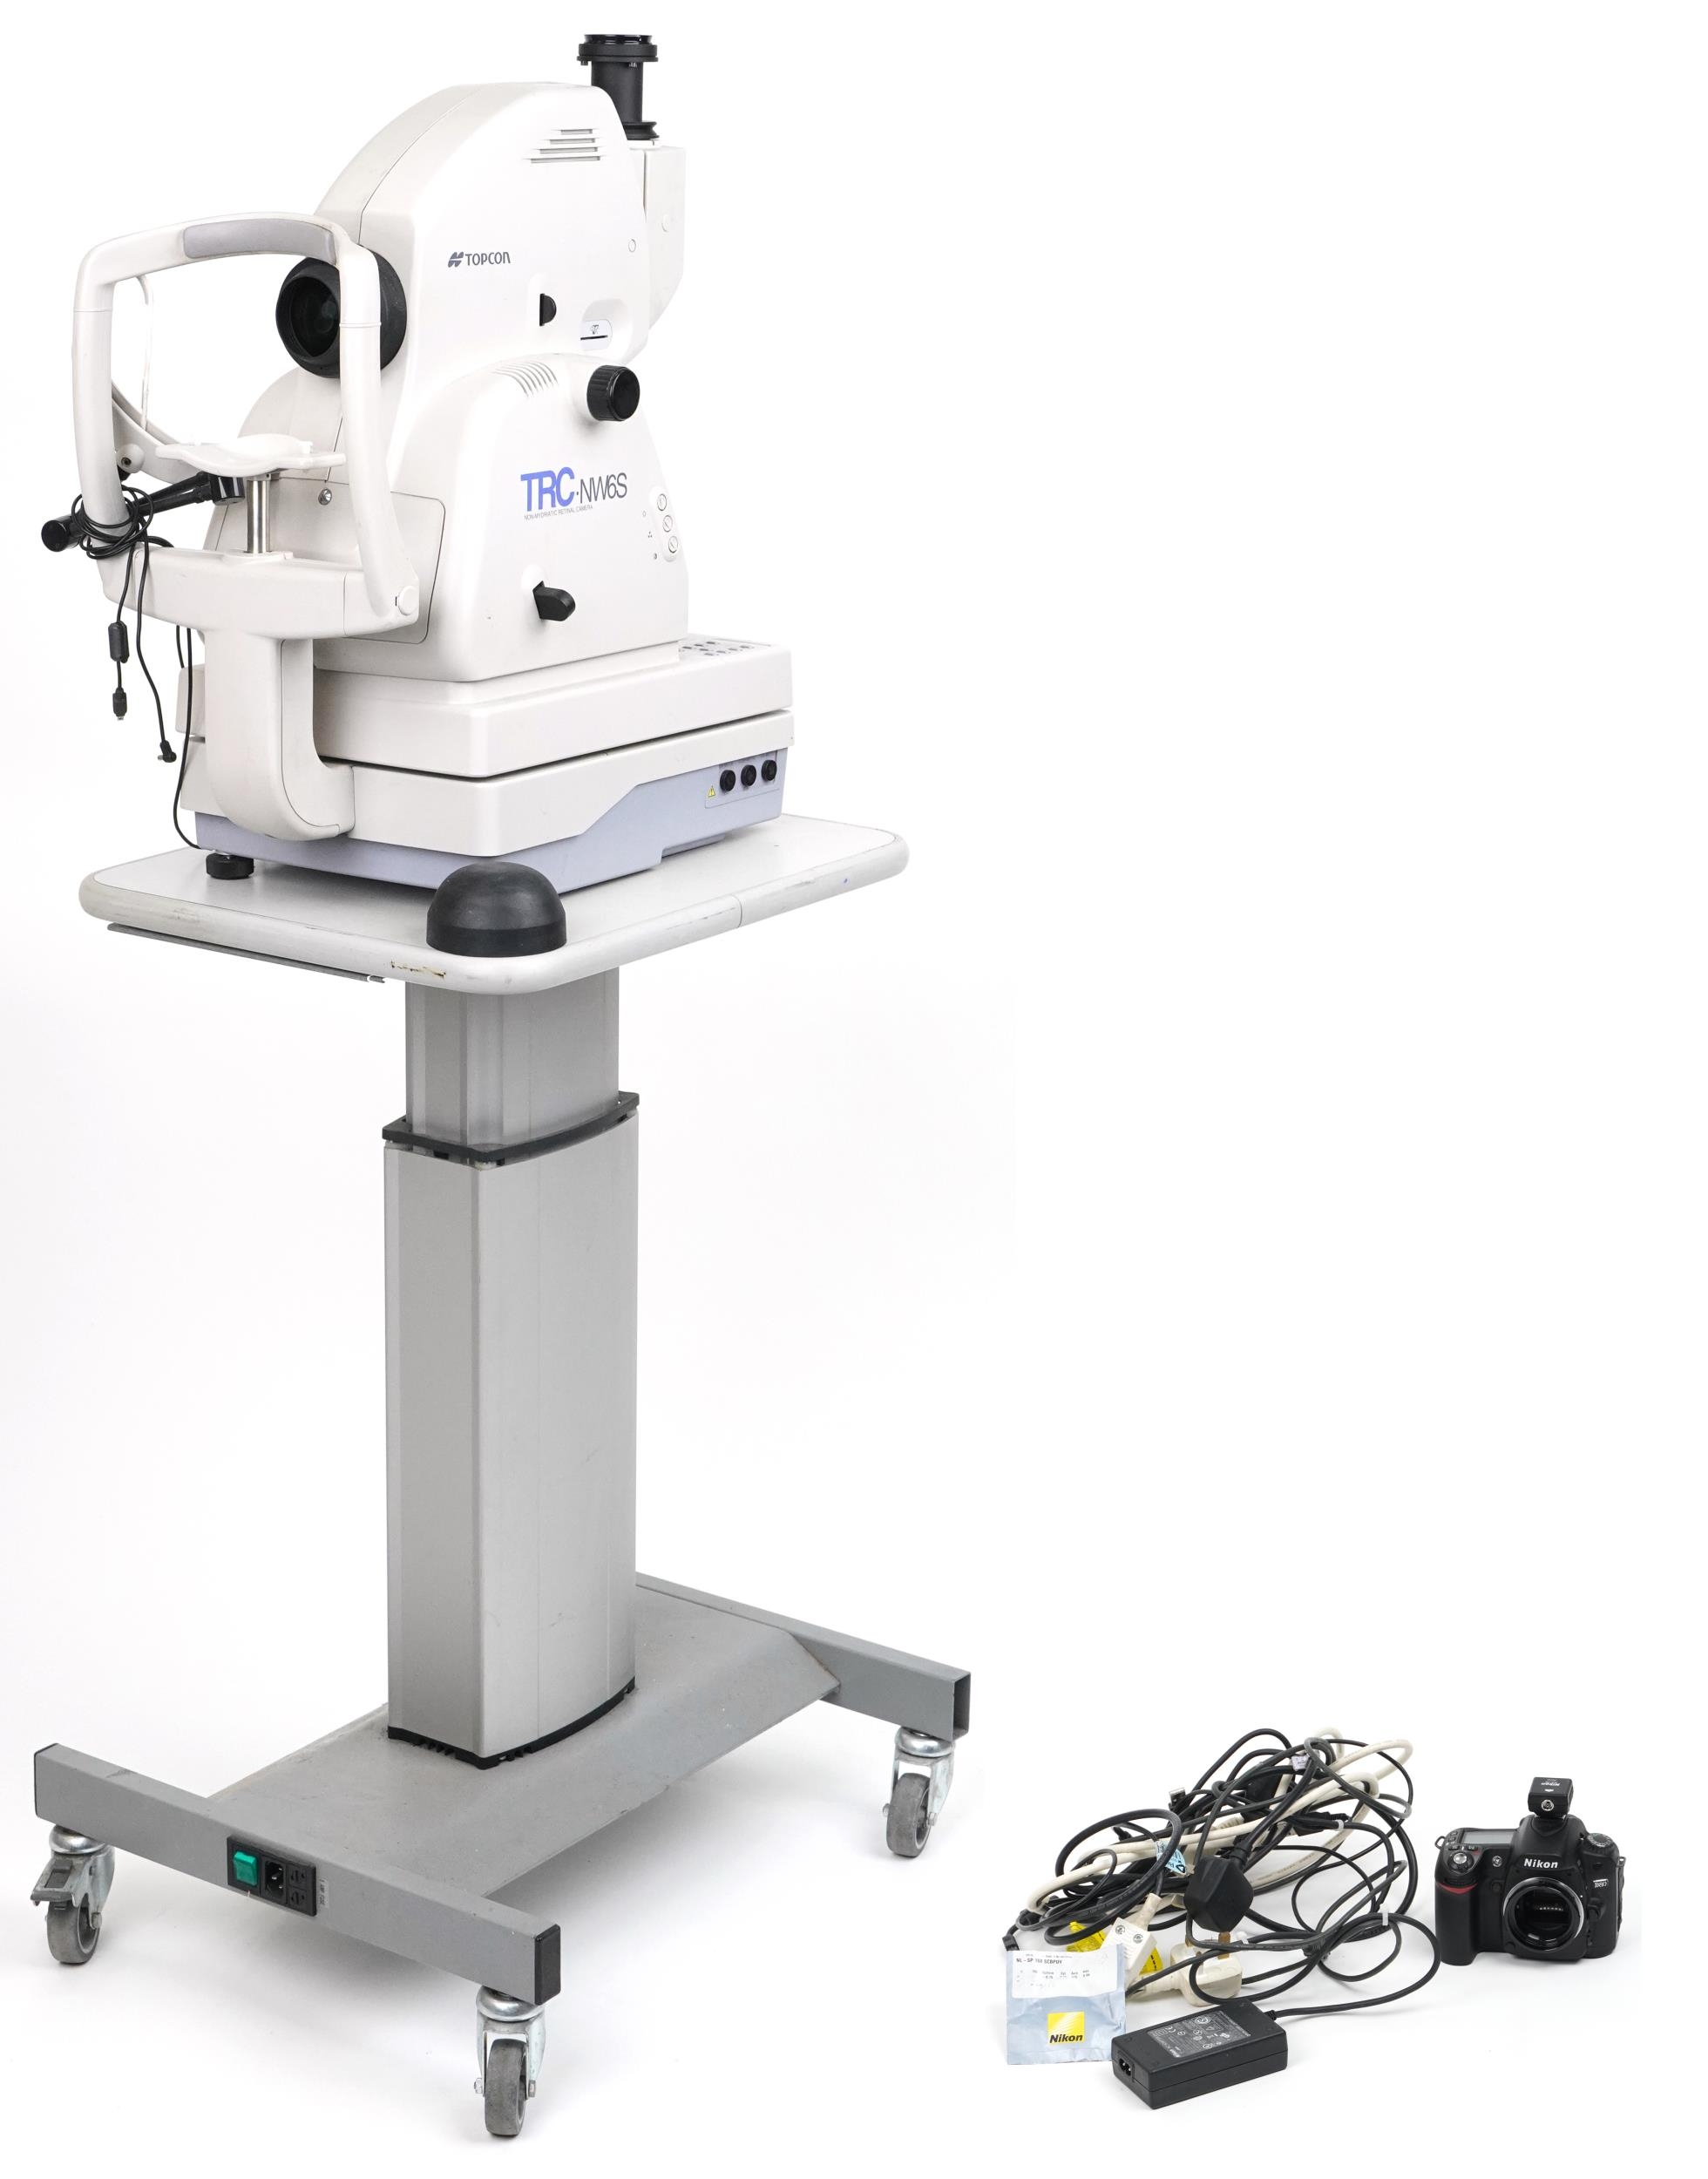 Topcon TRC NW6S Non-Mydriatic retinal camera on electric rise and fall table with Nikon D80 camera - Image 2 of 3